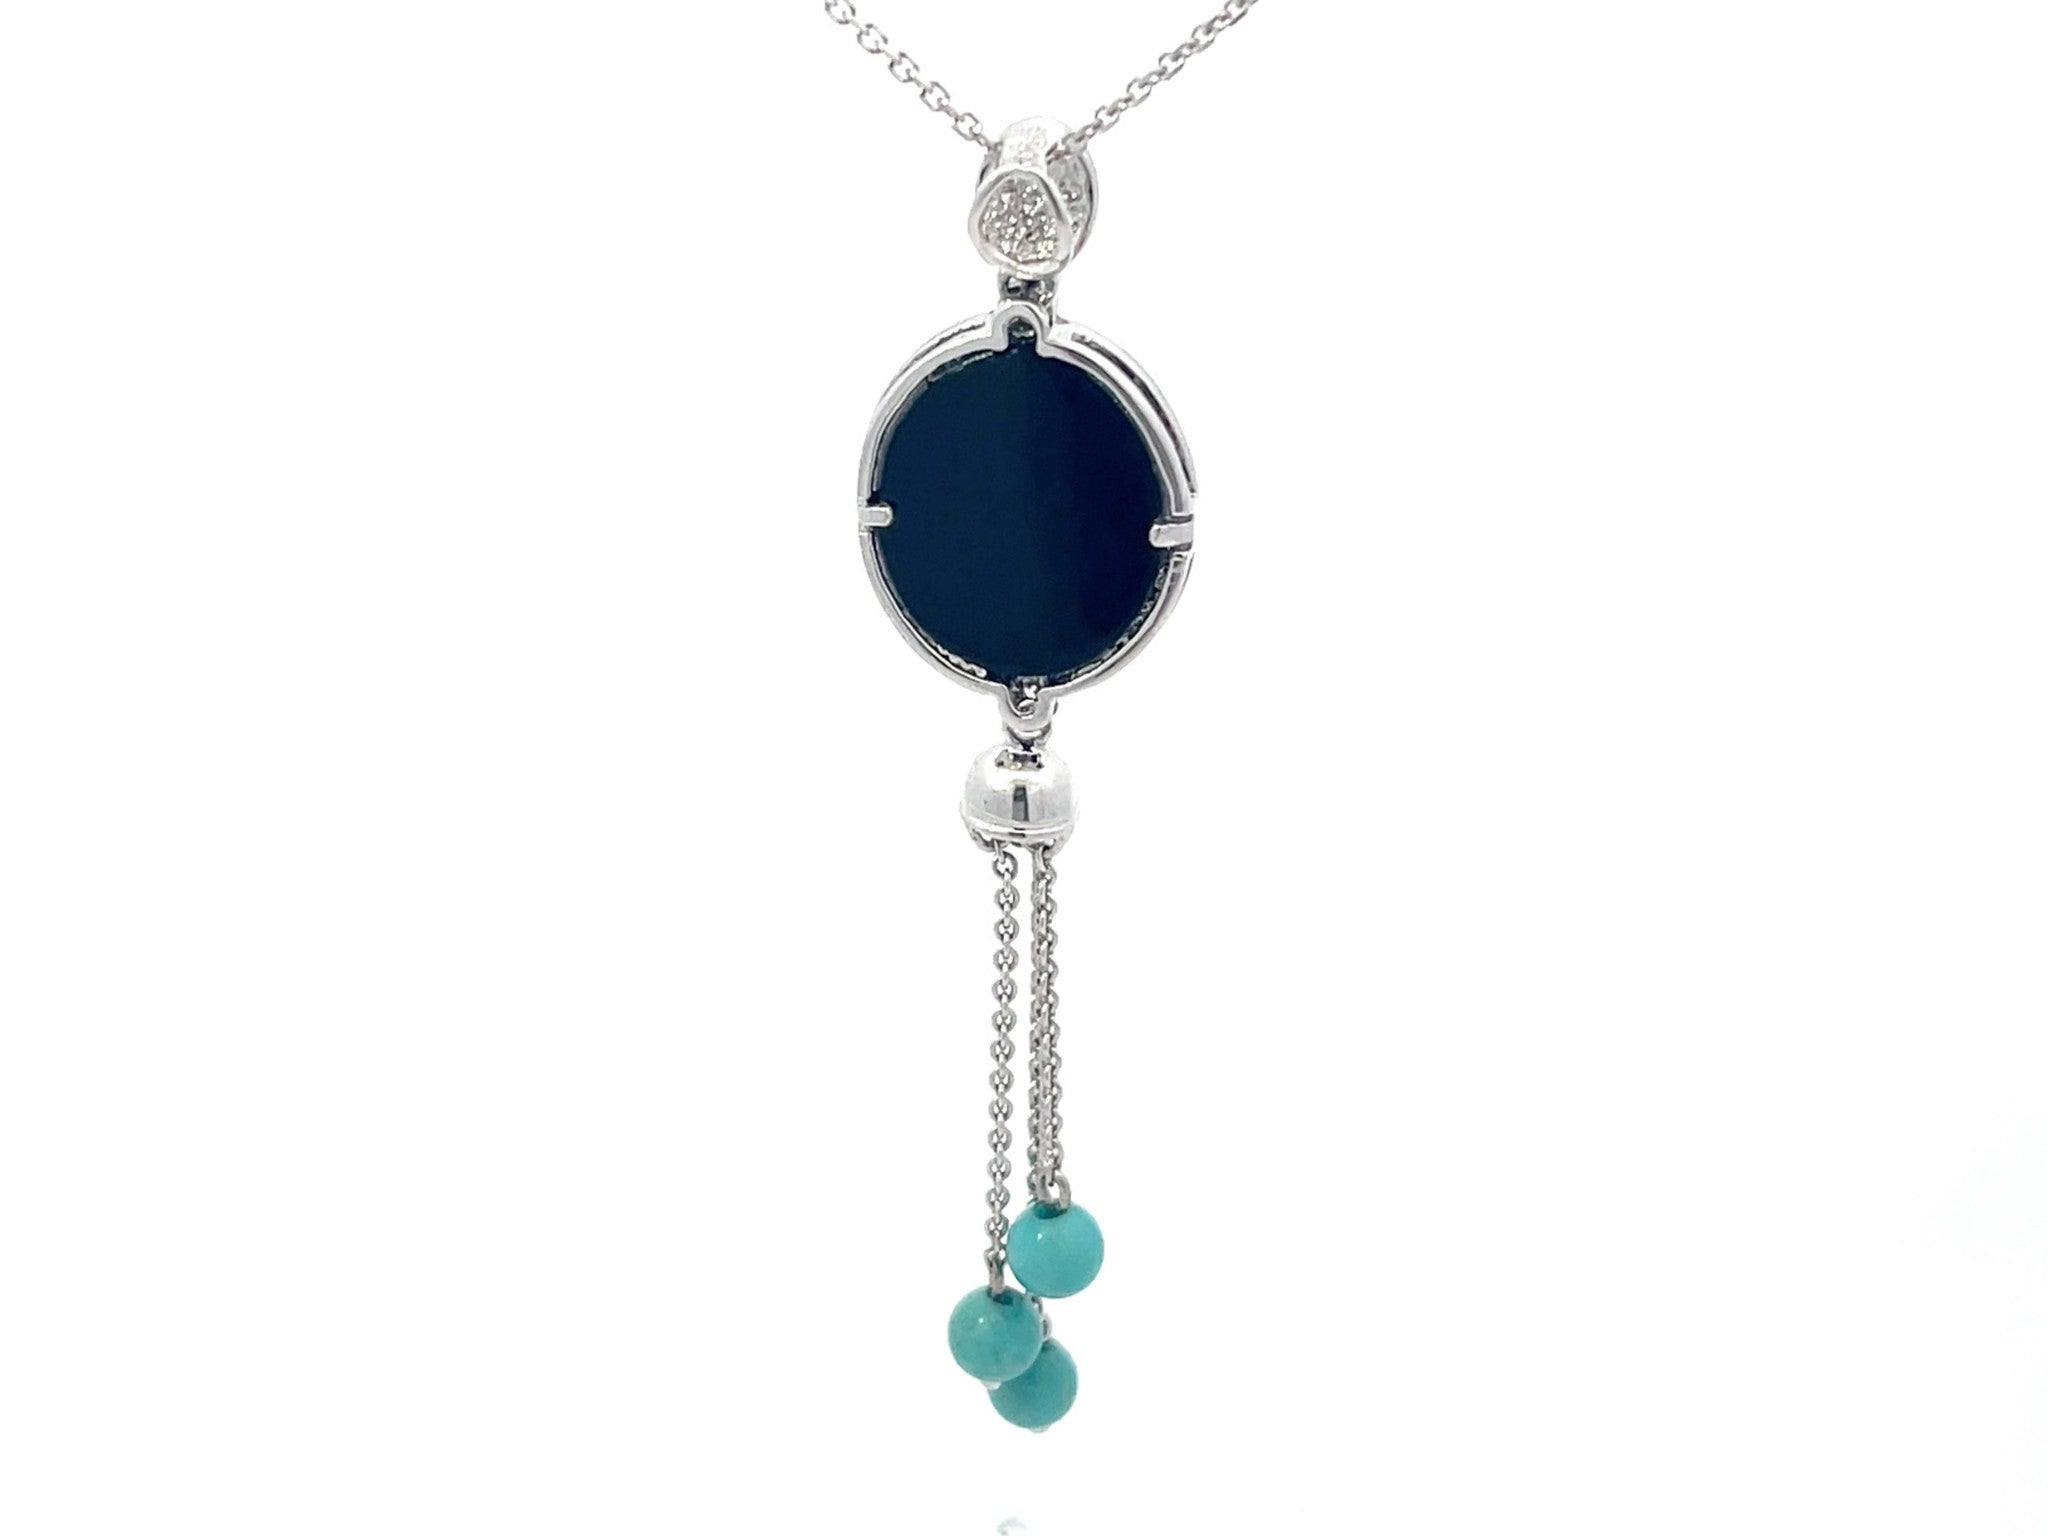 Diamond and Black Enamel Dangly Turquoise Necklace in 18k White Gold